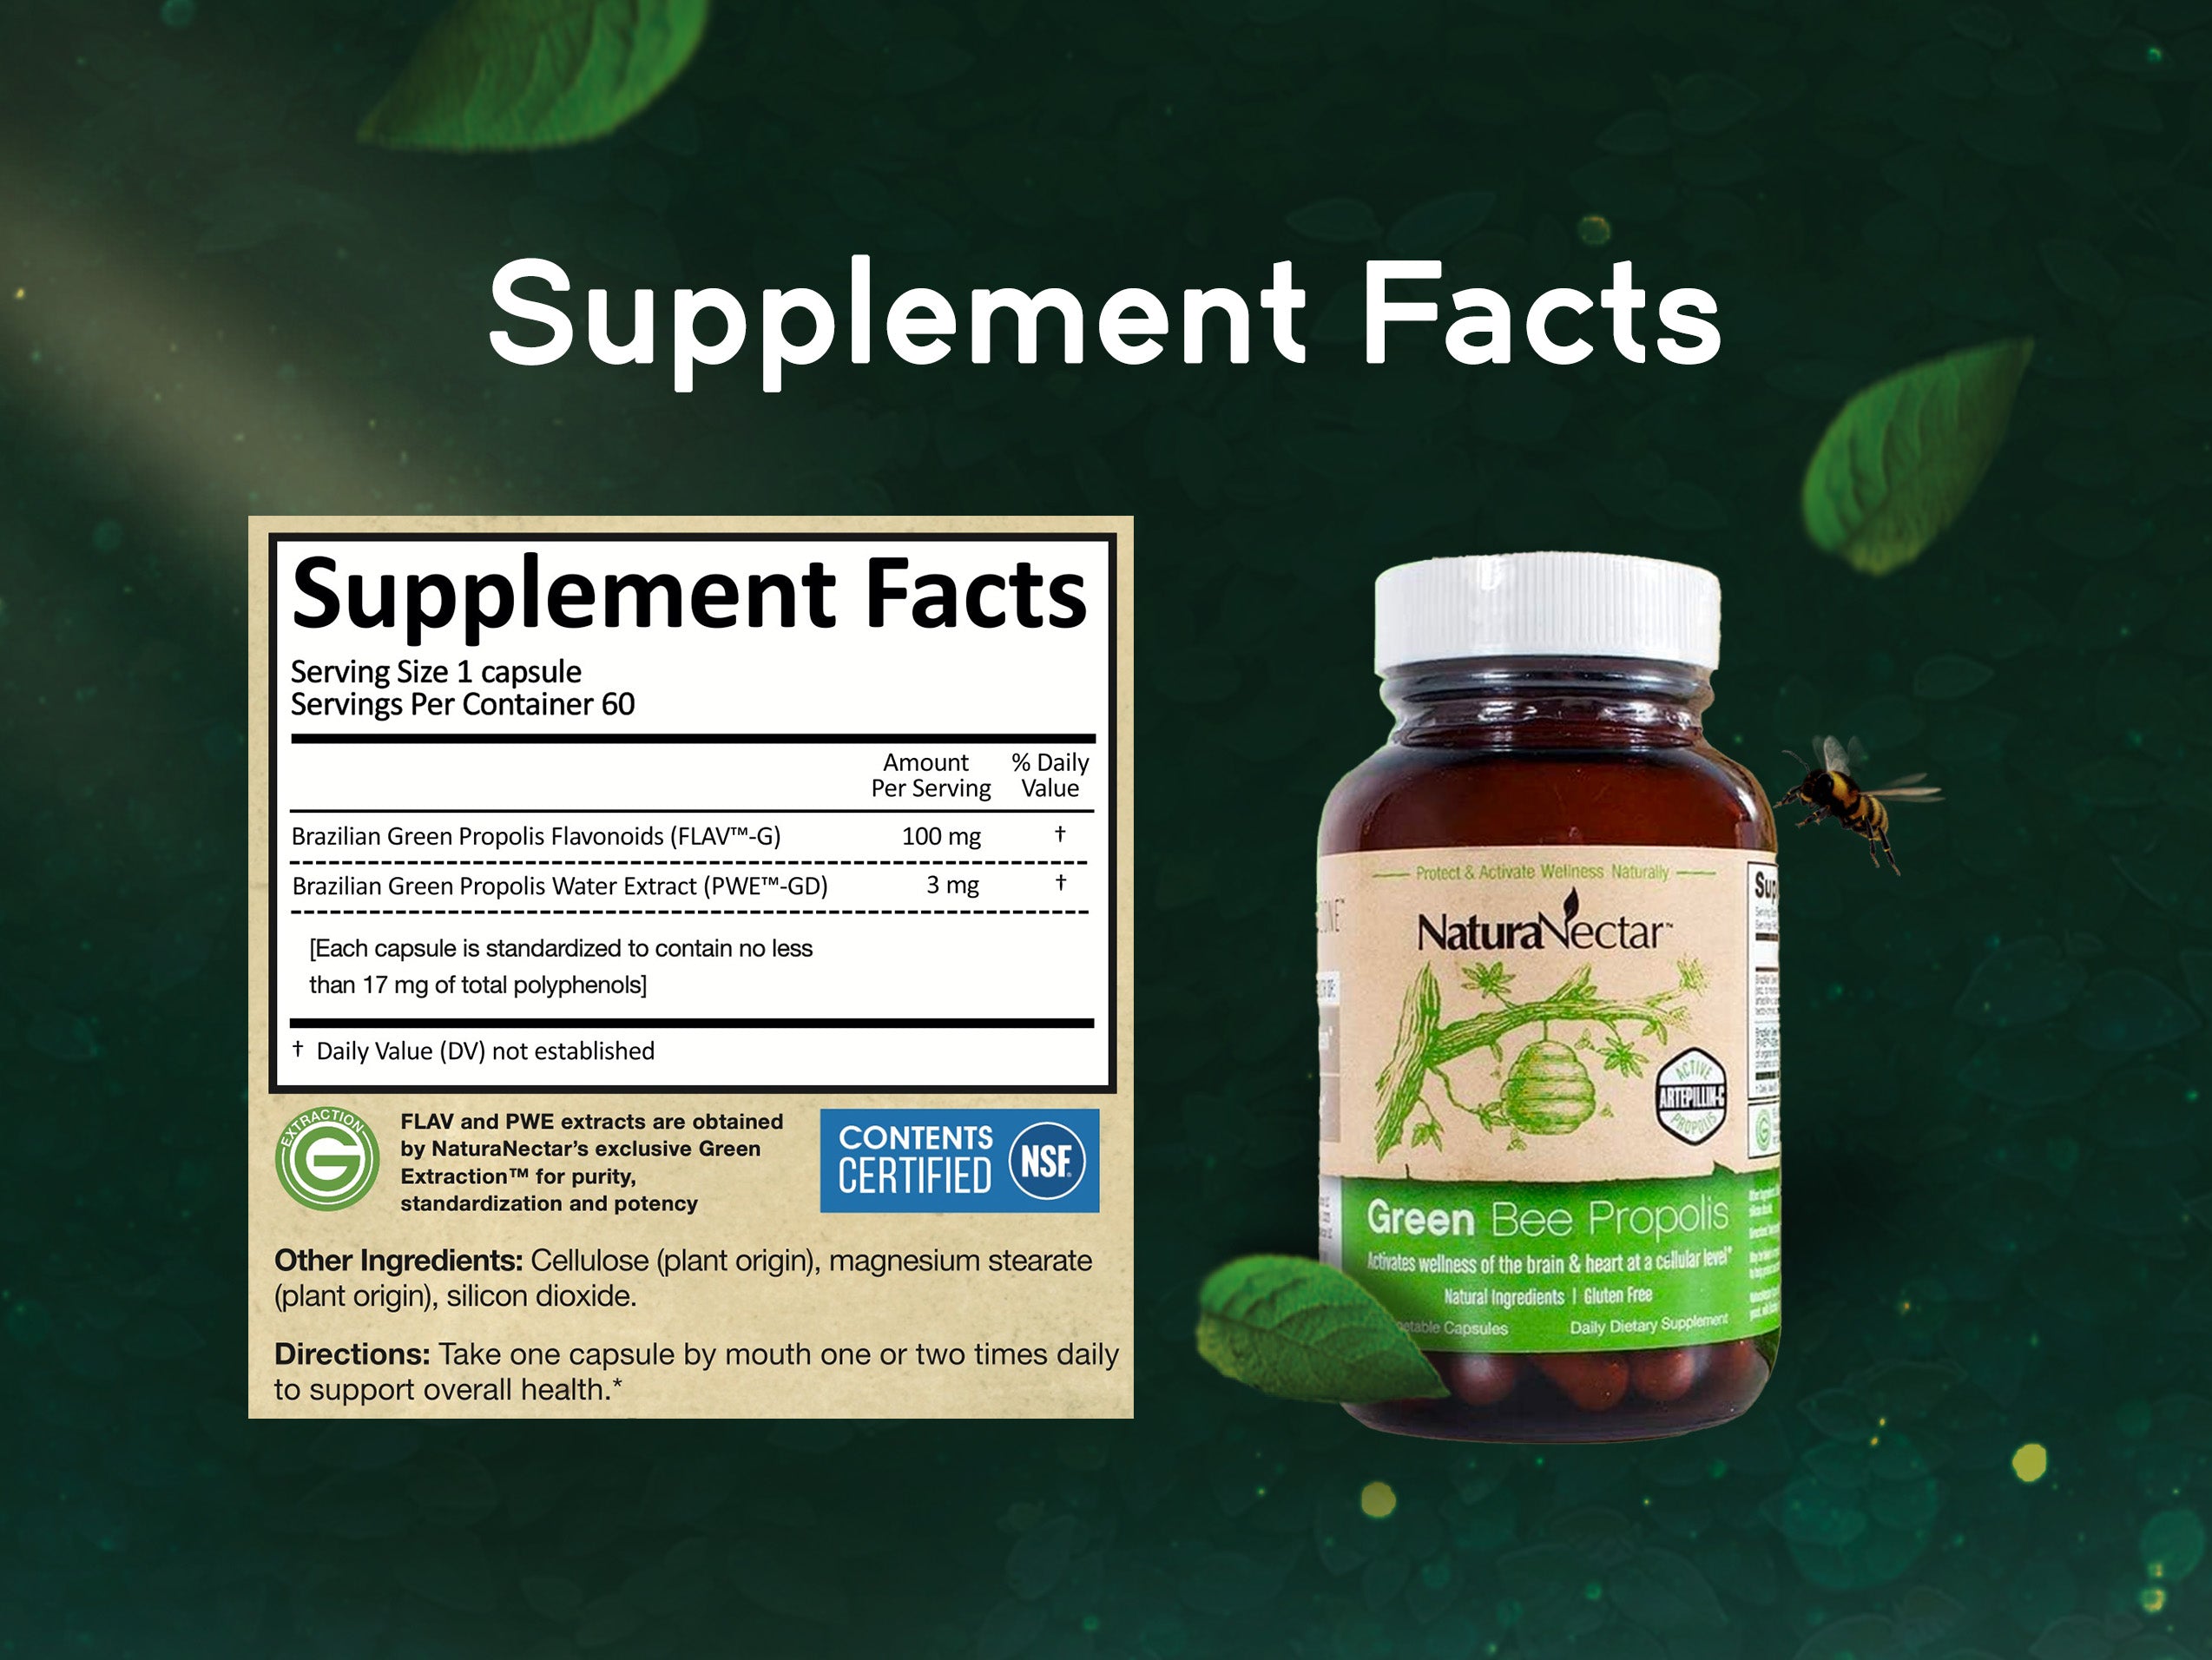 Green Bee Propolis - Nootropic product supports wellness of your brain* & immune system health* through exclusive polyphenols like Artepillin-C  - Pack of 3